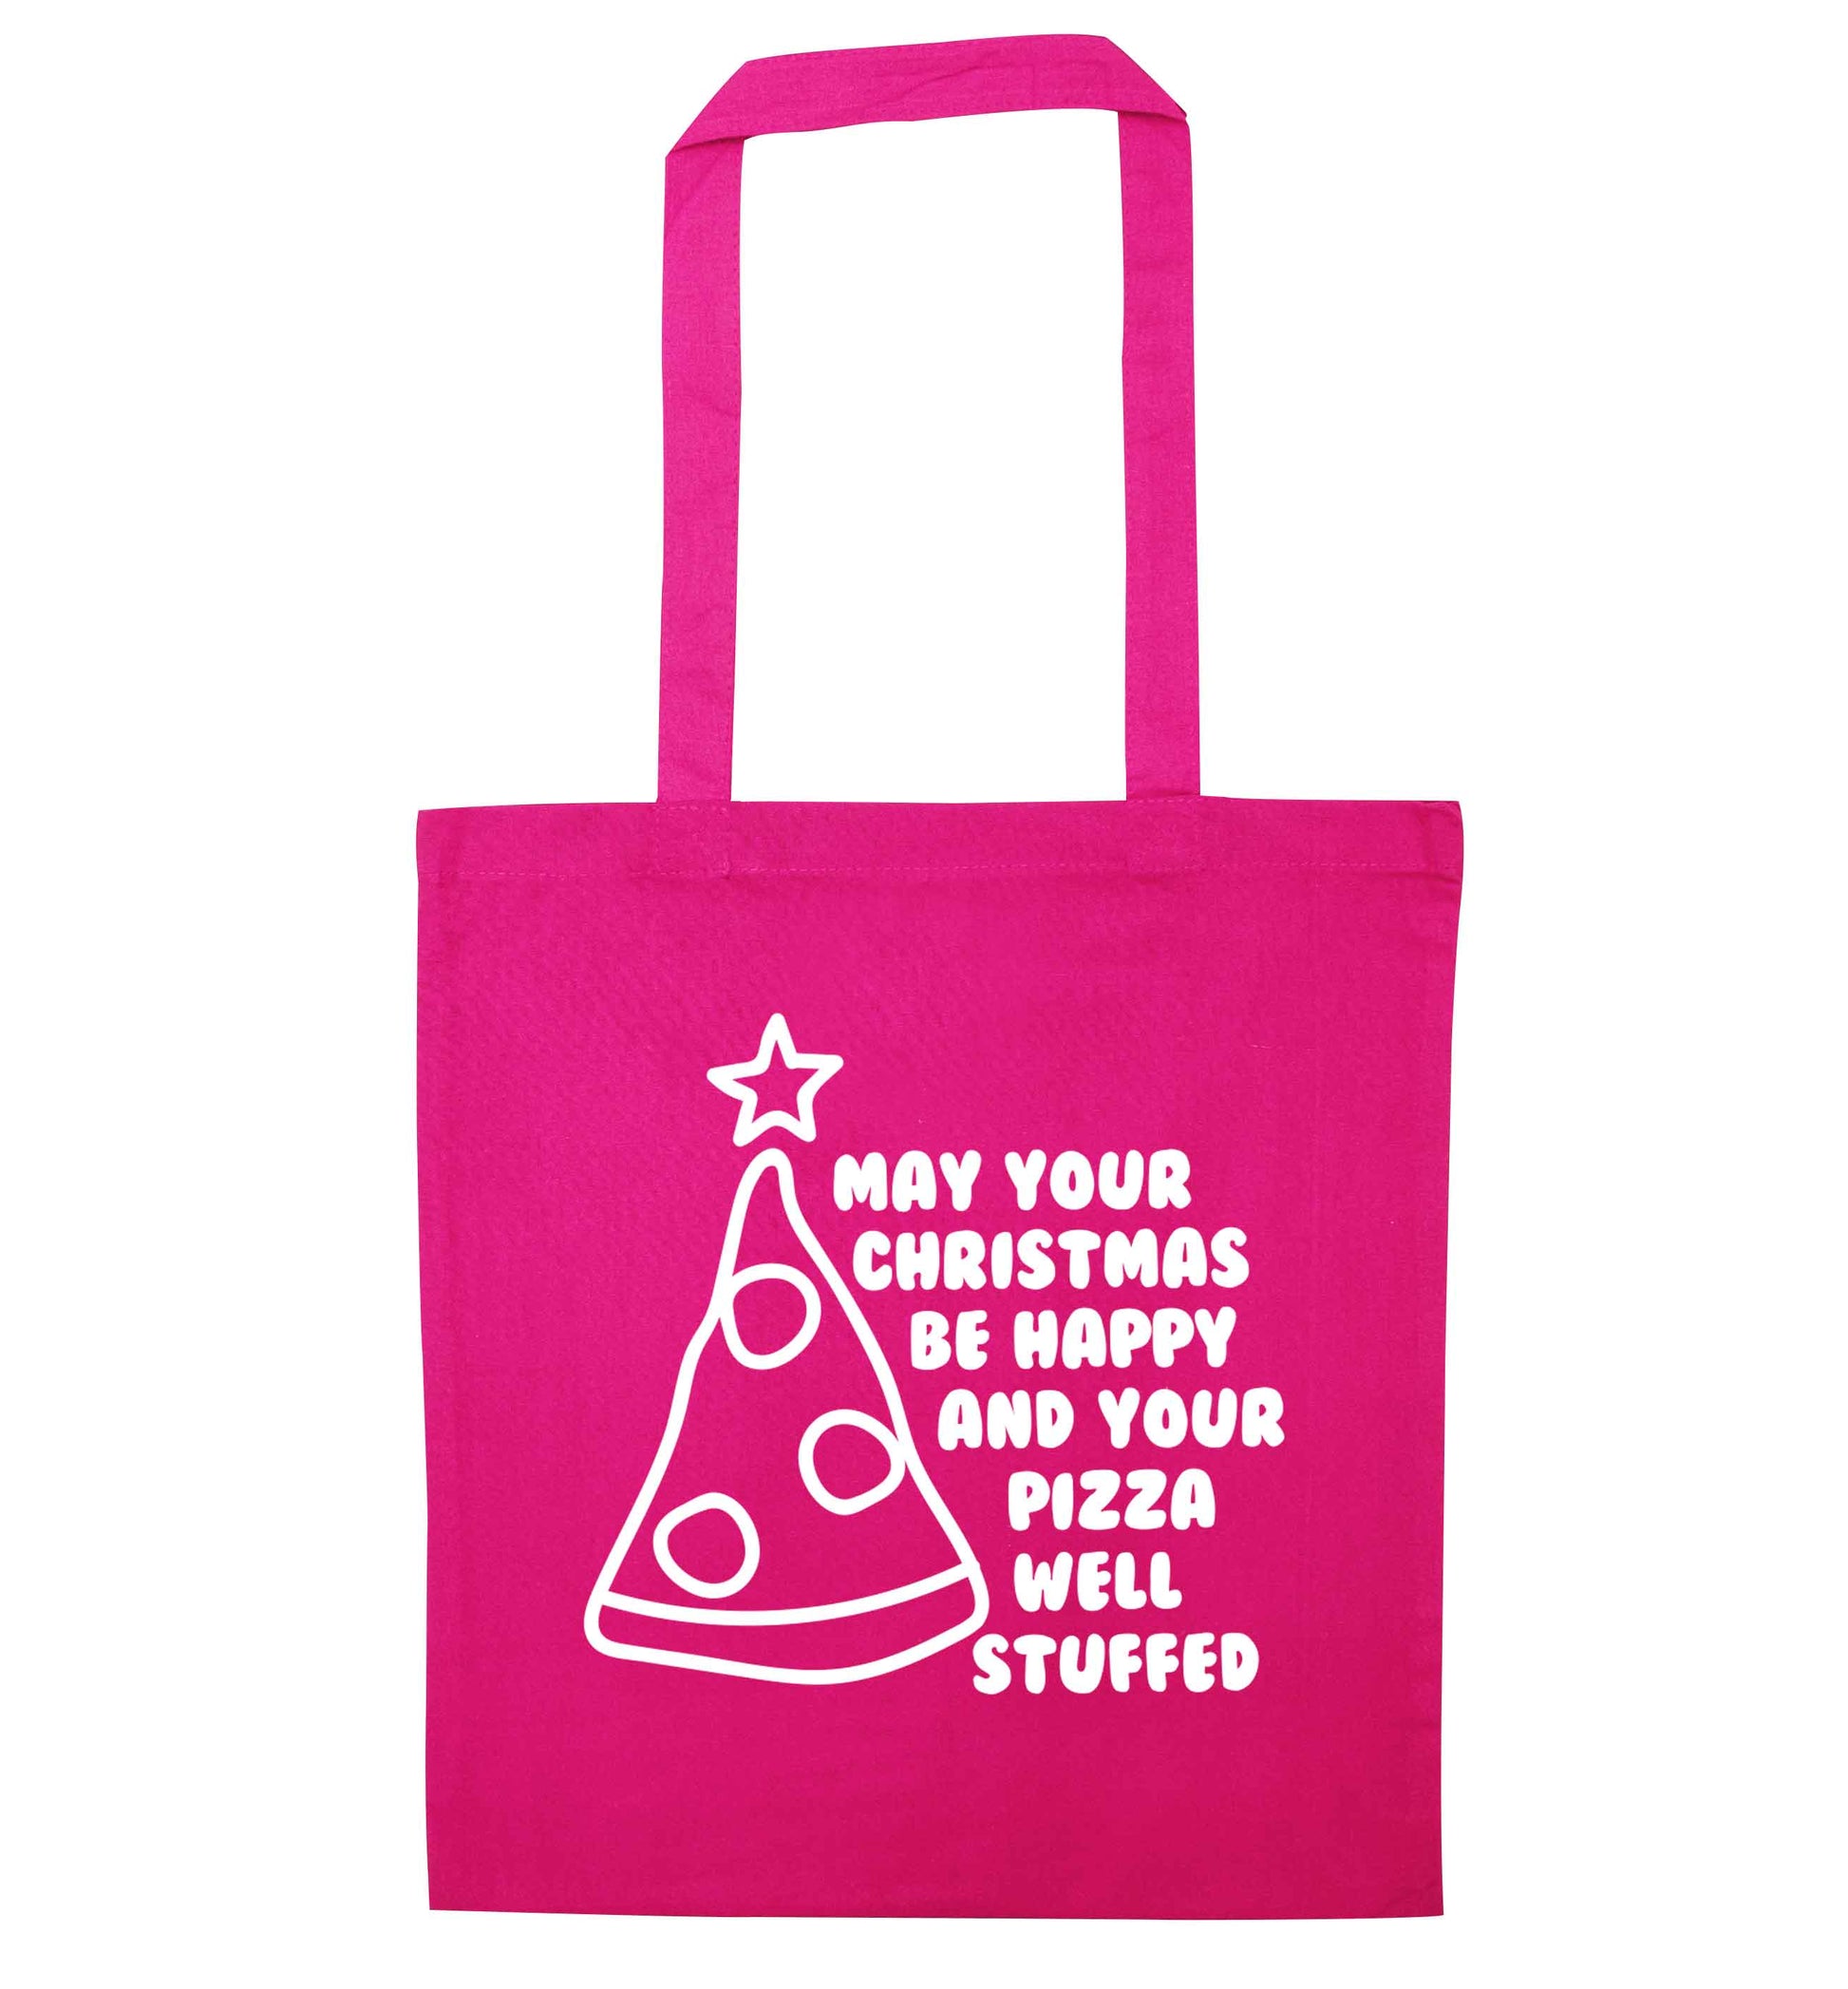 May your Christmas be happy and your pizza well stuffed pink tote bag